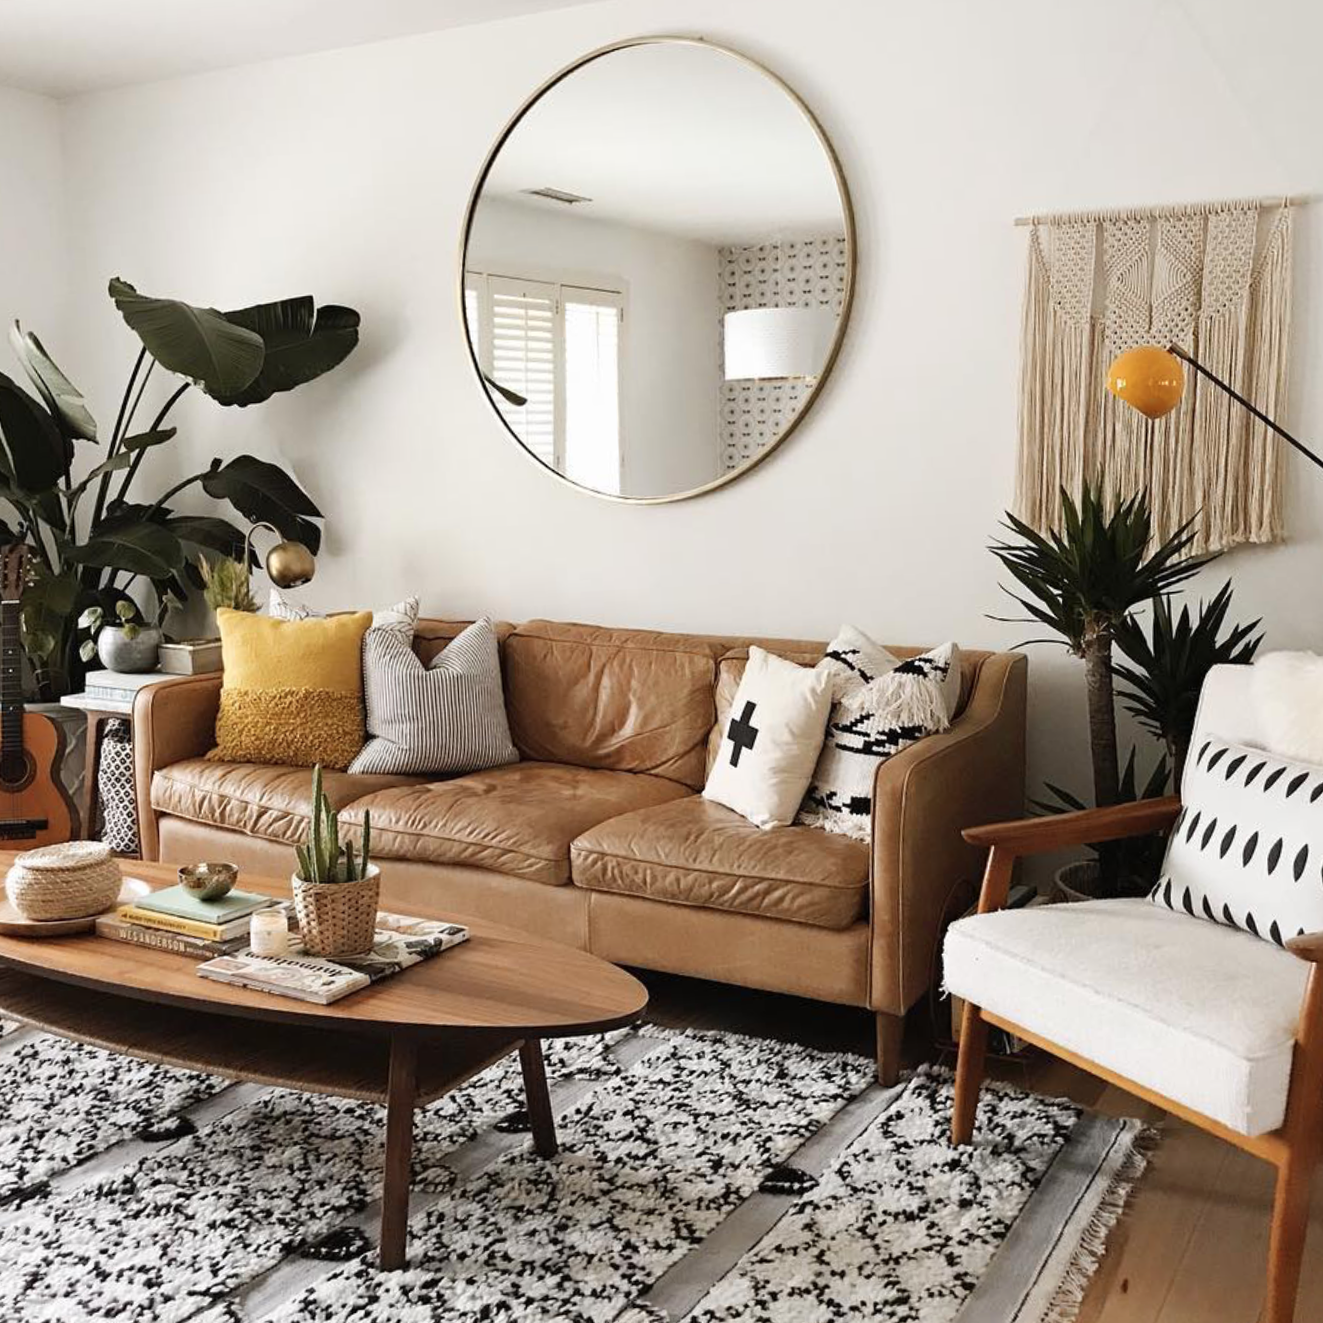 Small Apartment Decor, How To Decorate An Apartment Living Room